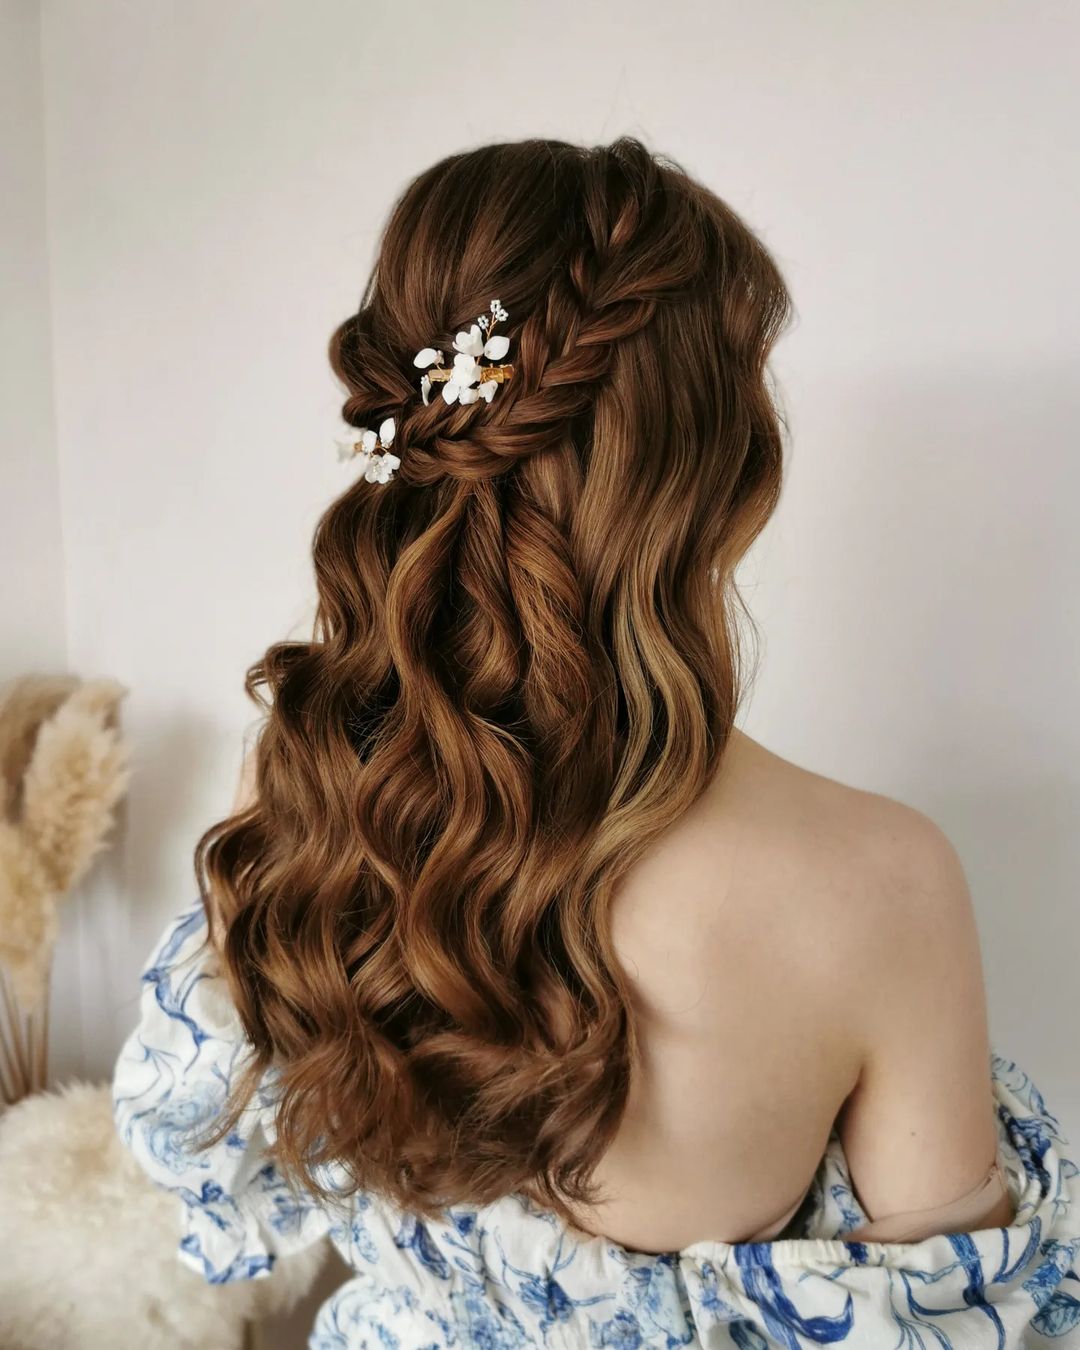 Grecian half up half down wedding hairstyle with braid and flower